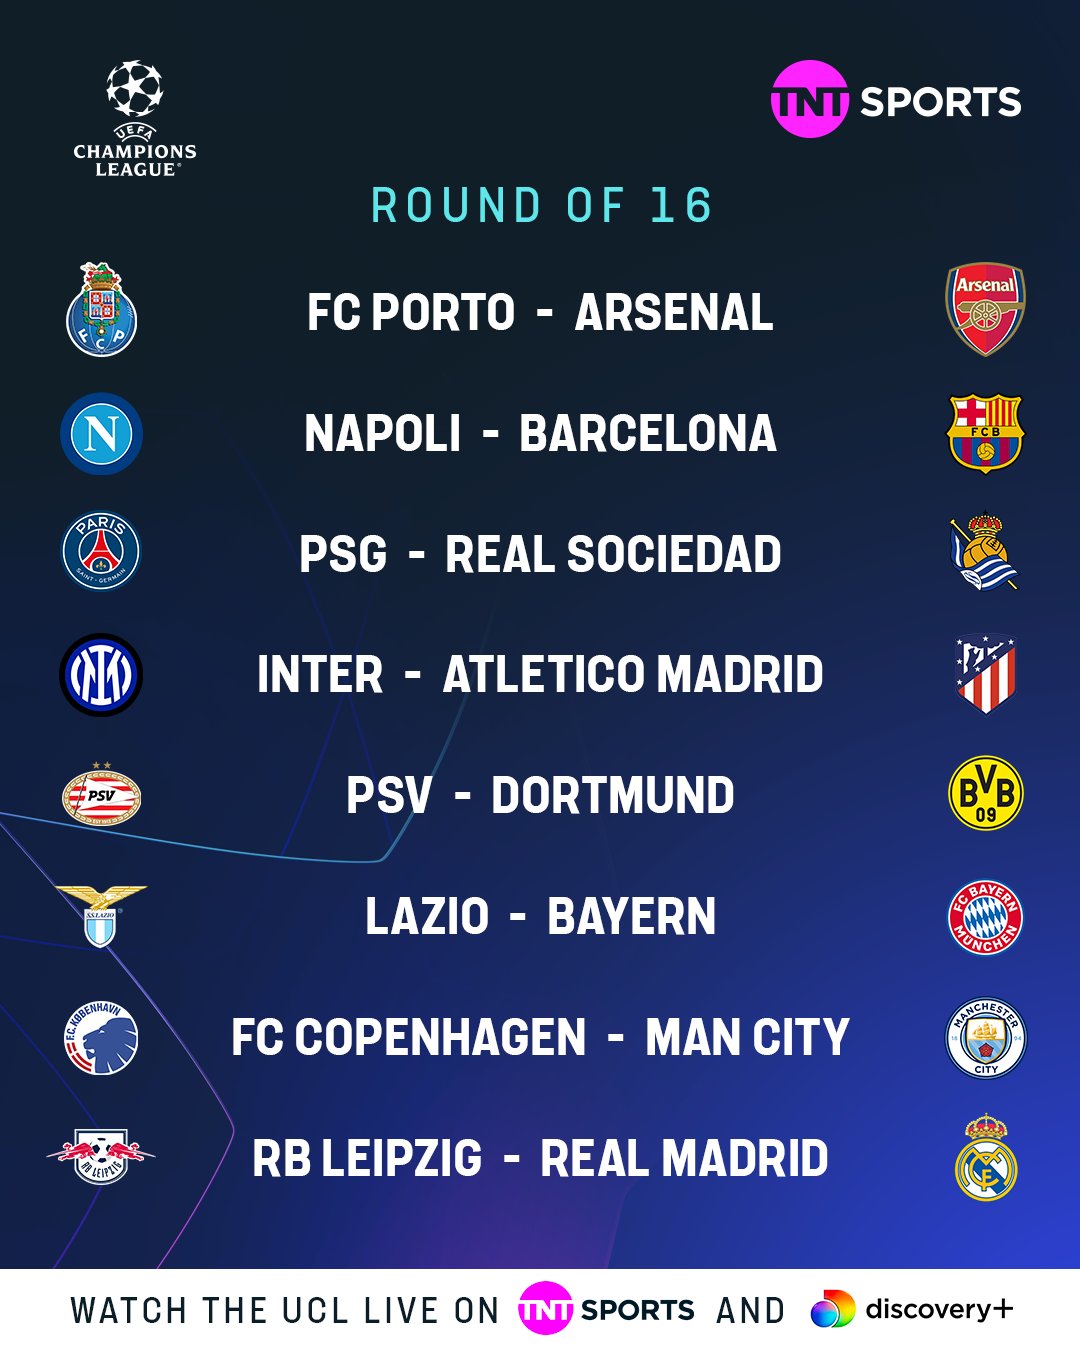 UEFA Champions League : Taking a look at Round of 16 draws